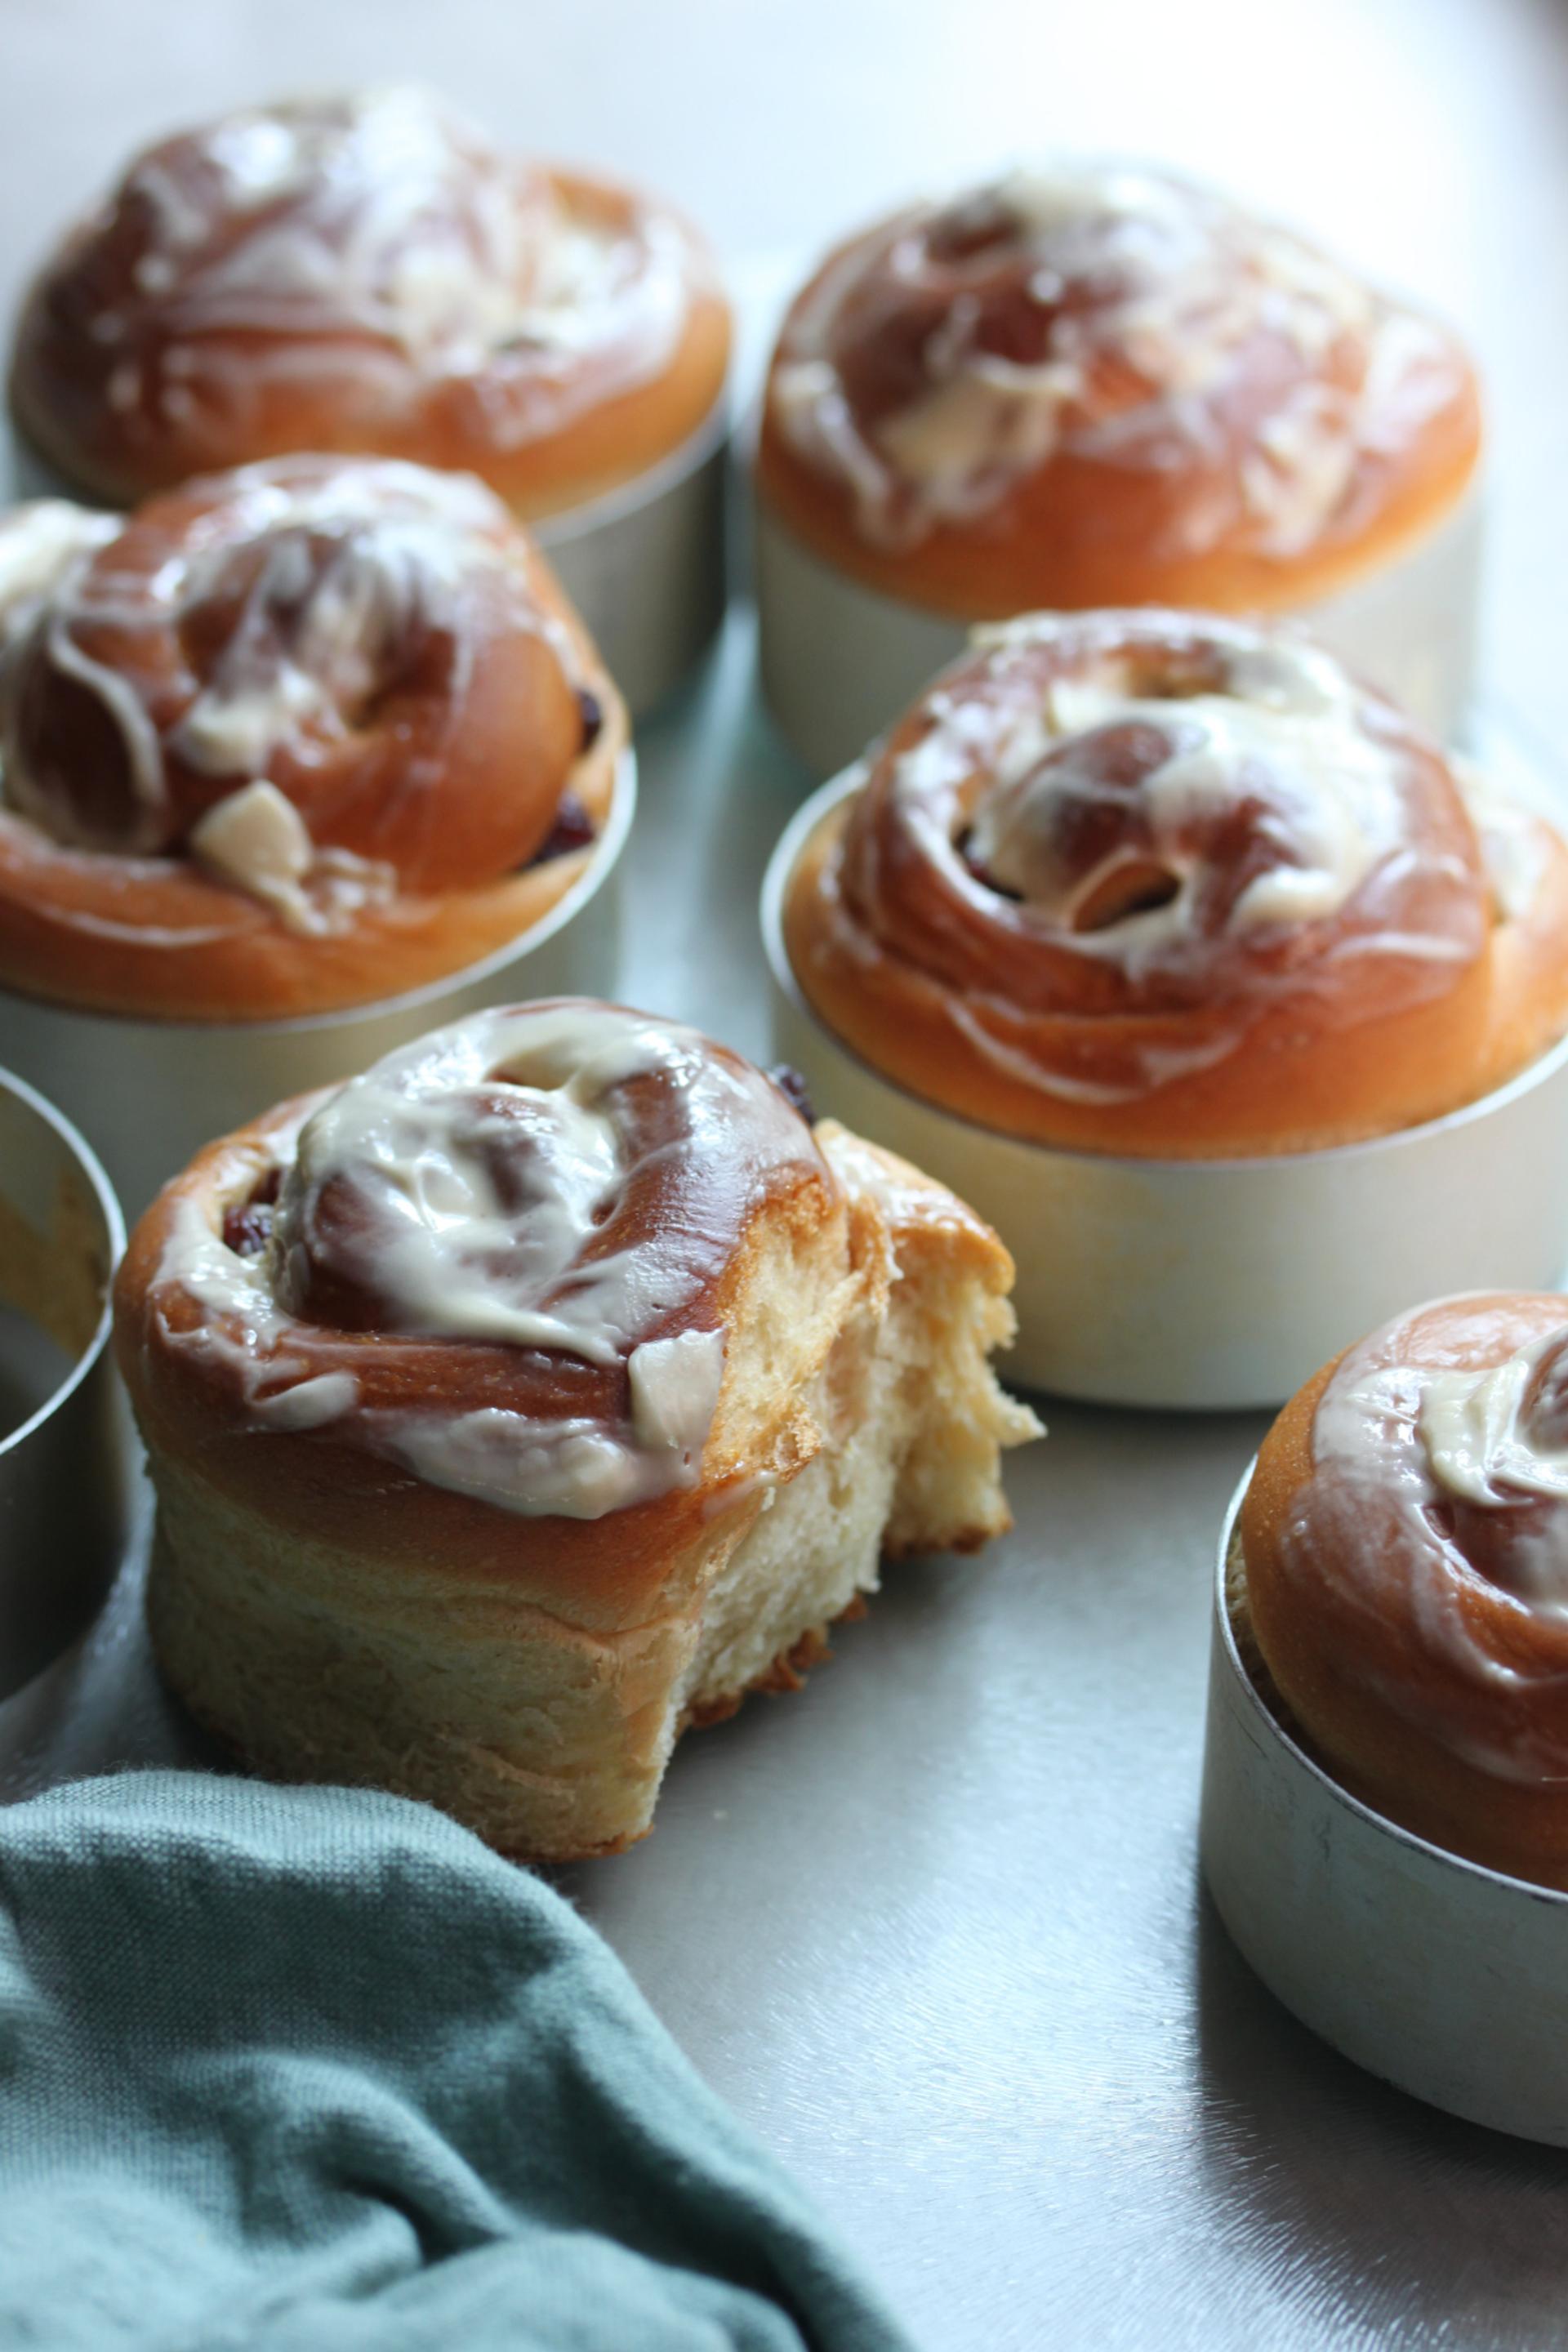 Cinnamon rolls are appetizing and perfect to be part of a coffee shop's dessert menu - they go great with coffee